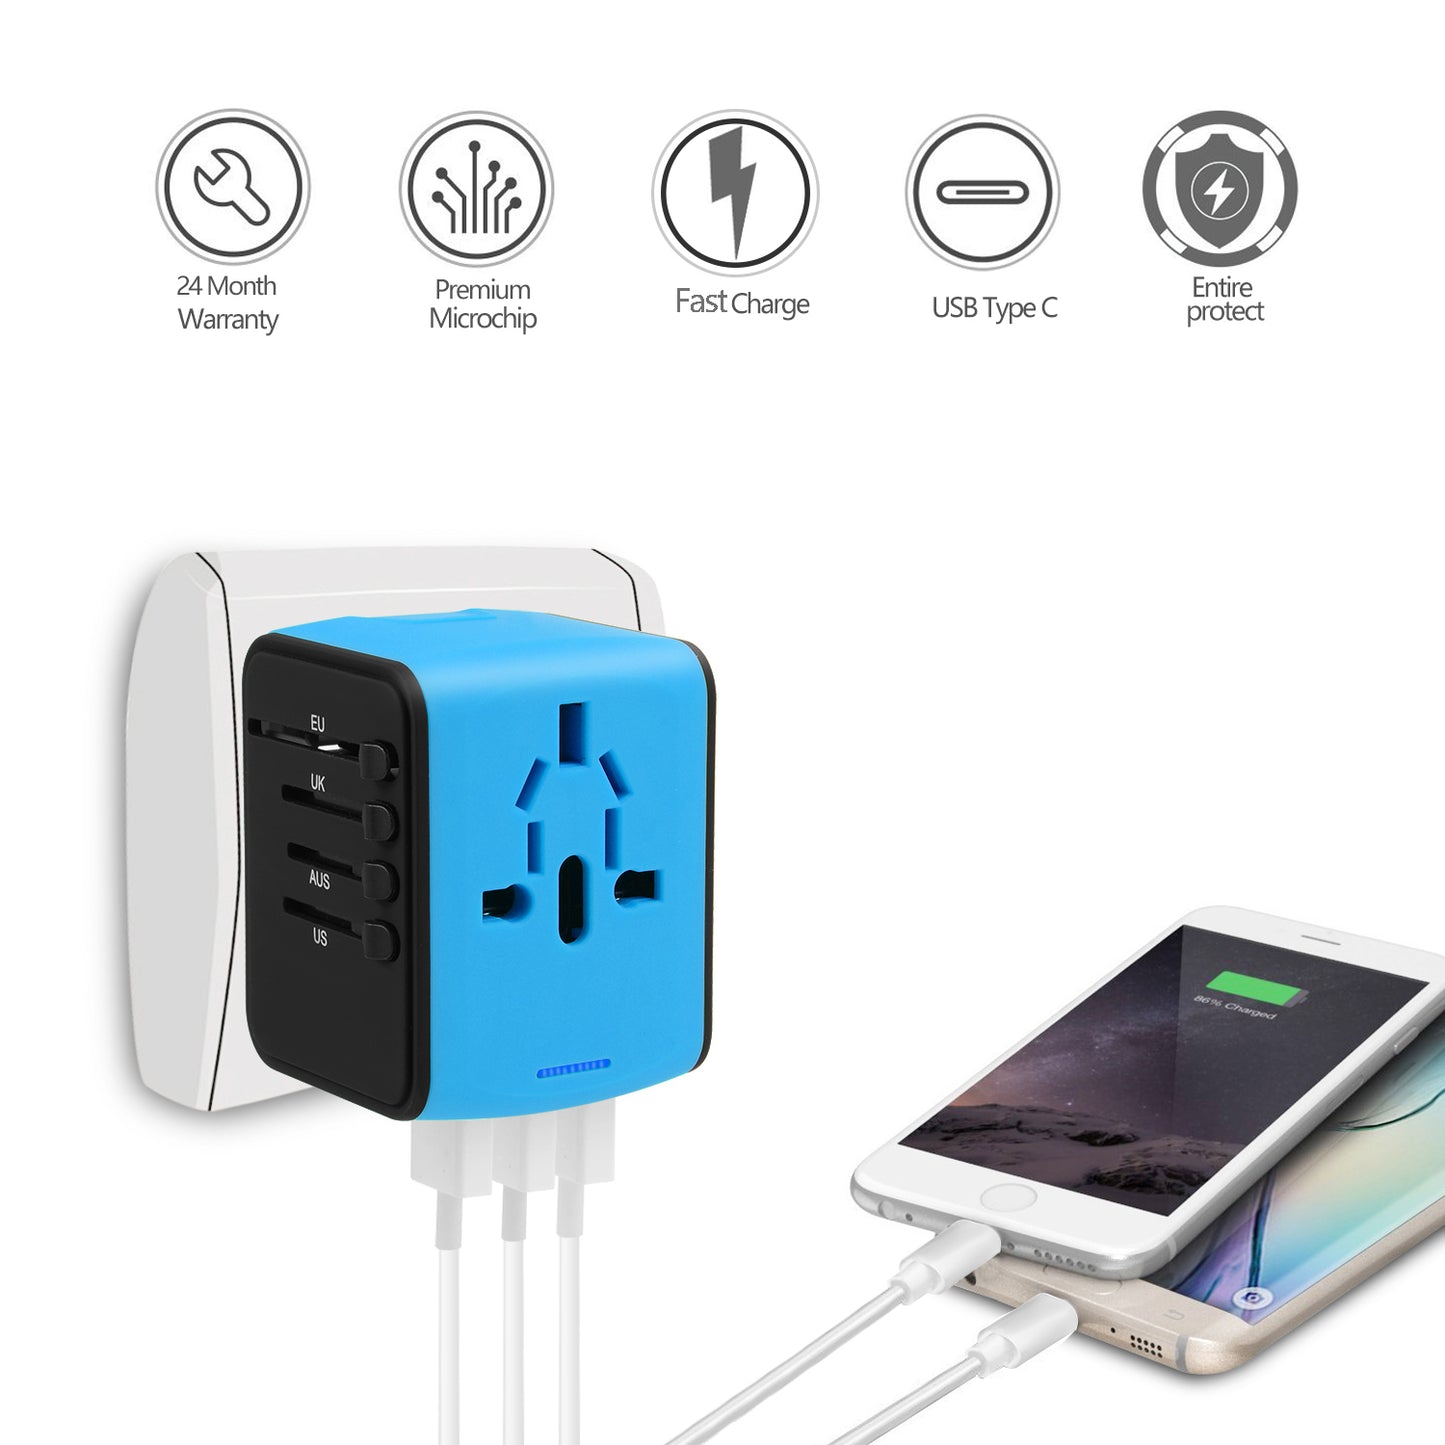 JMFONE Universal International Travel Power Adapter W/High Speed 2.4A USB, 3.0A Type-C Wall Charger, European Adapter, Worldwide AC Outlet Plugs Adapters for Europe, UK, US, AU, Asia